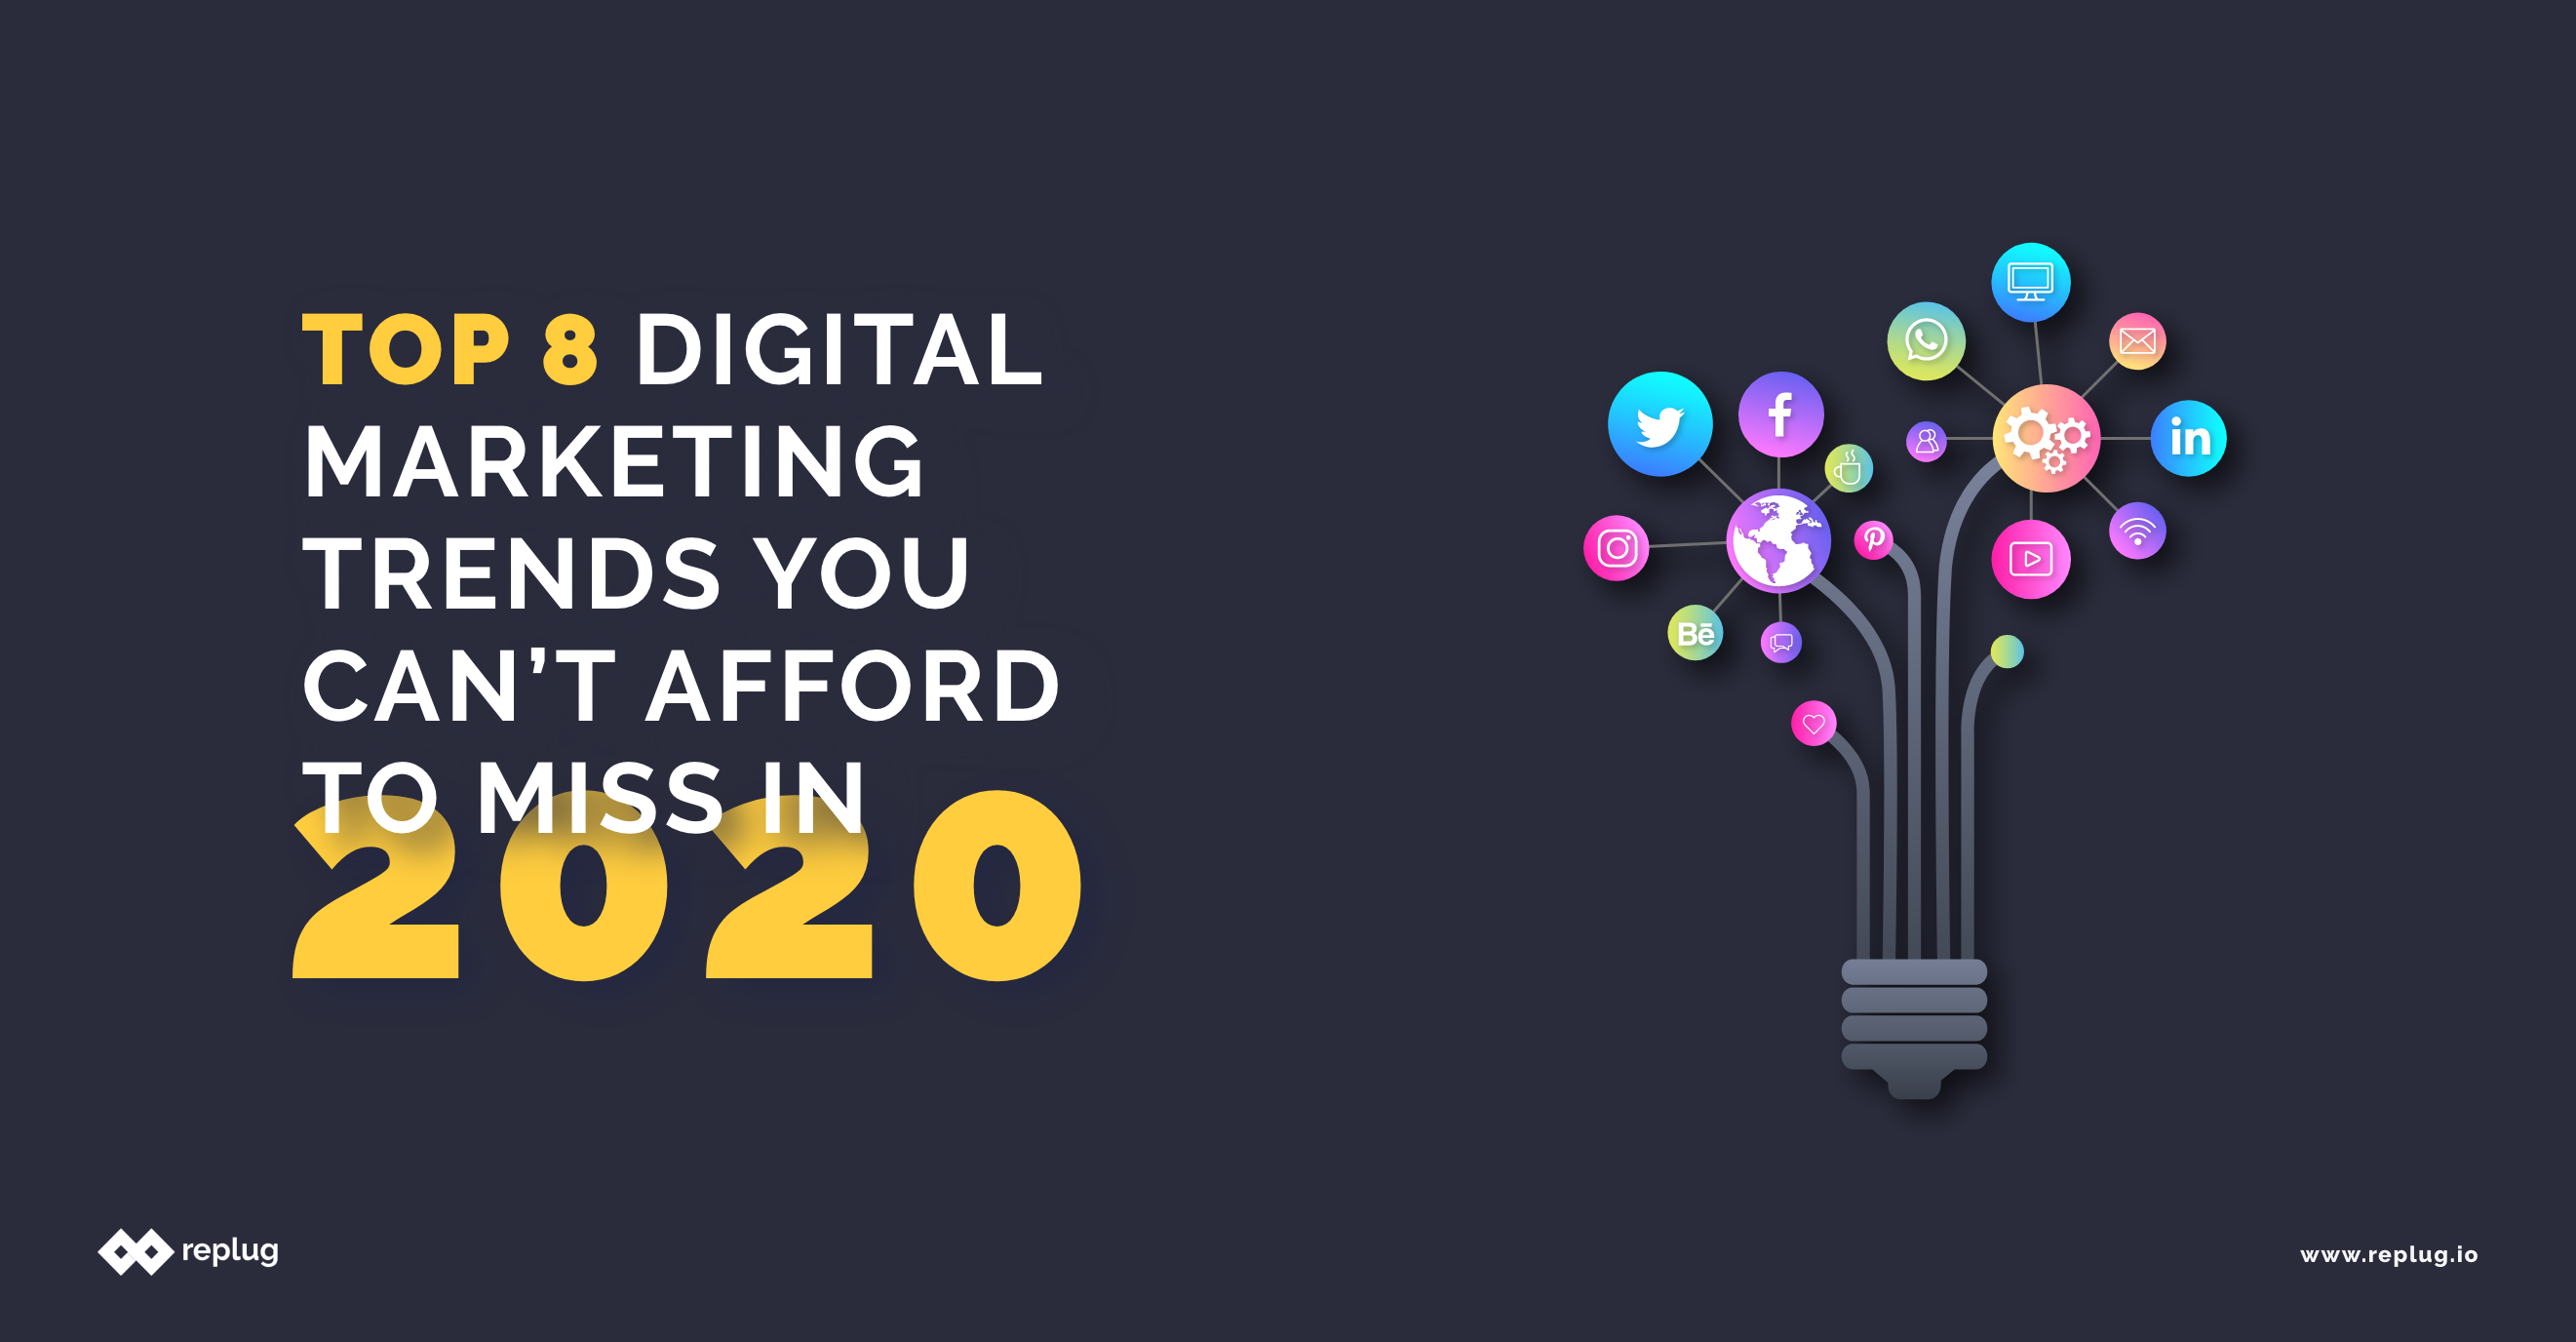 Top 8 Digital Marketing Trends You Can’t Afford to Miss in 2020